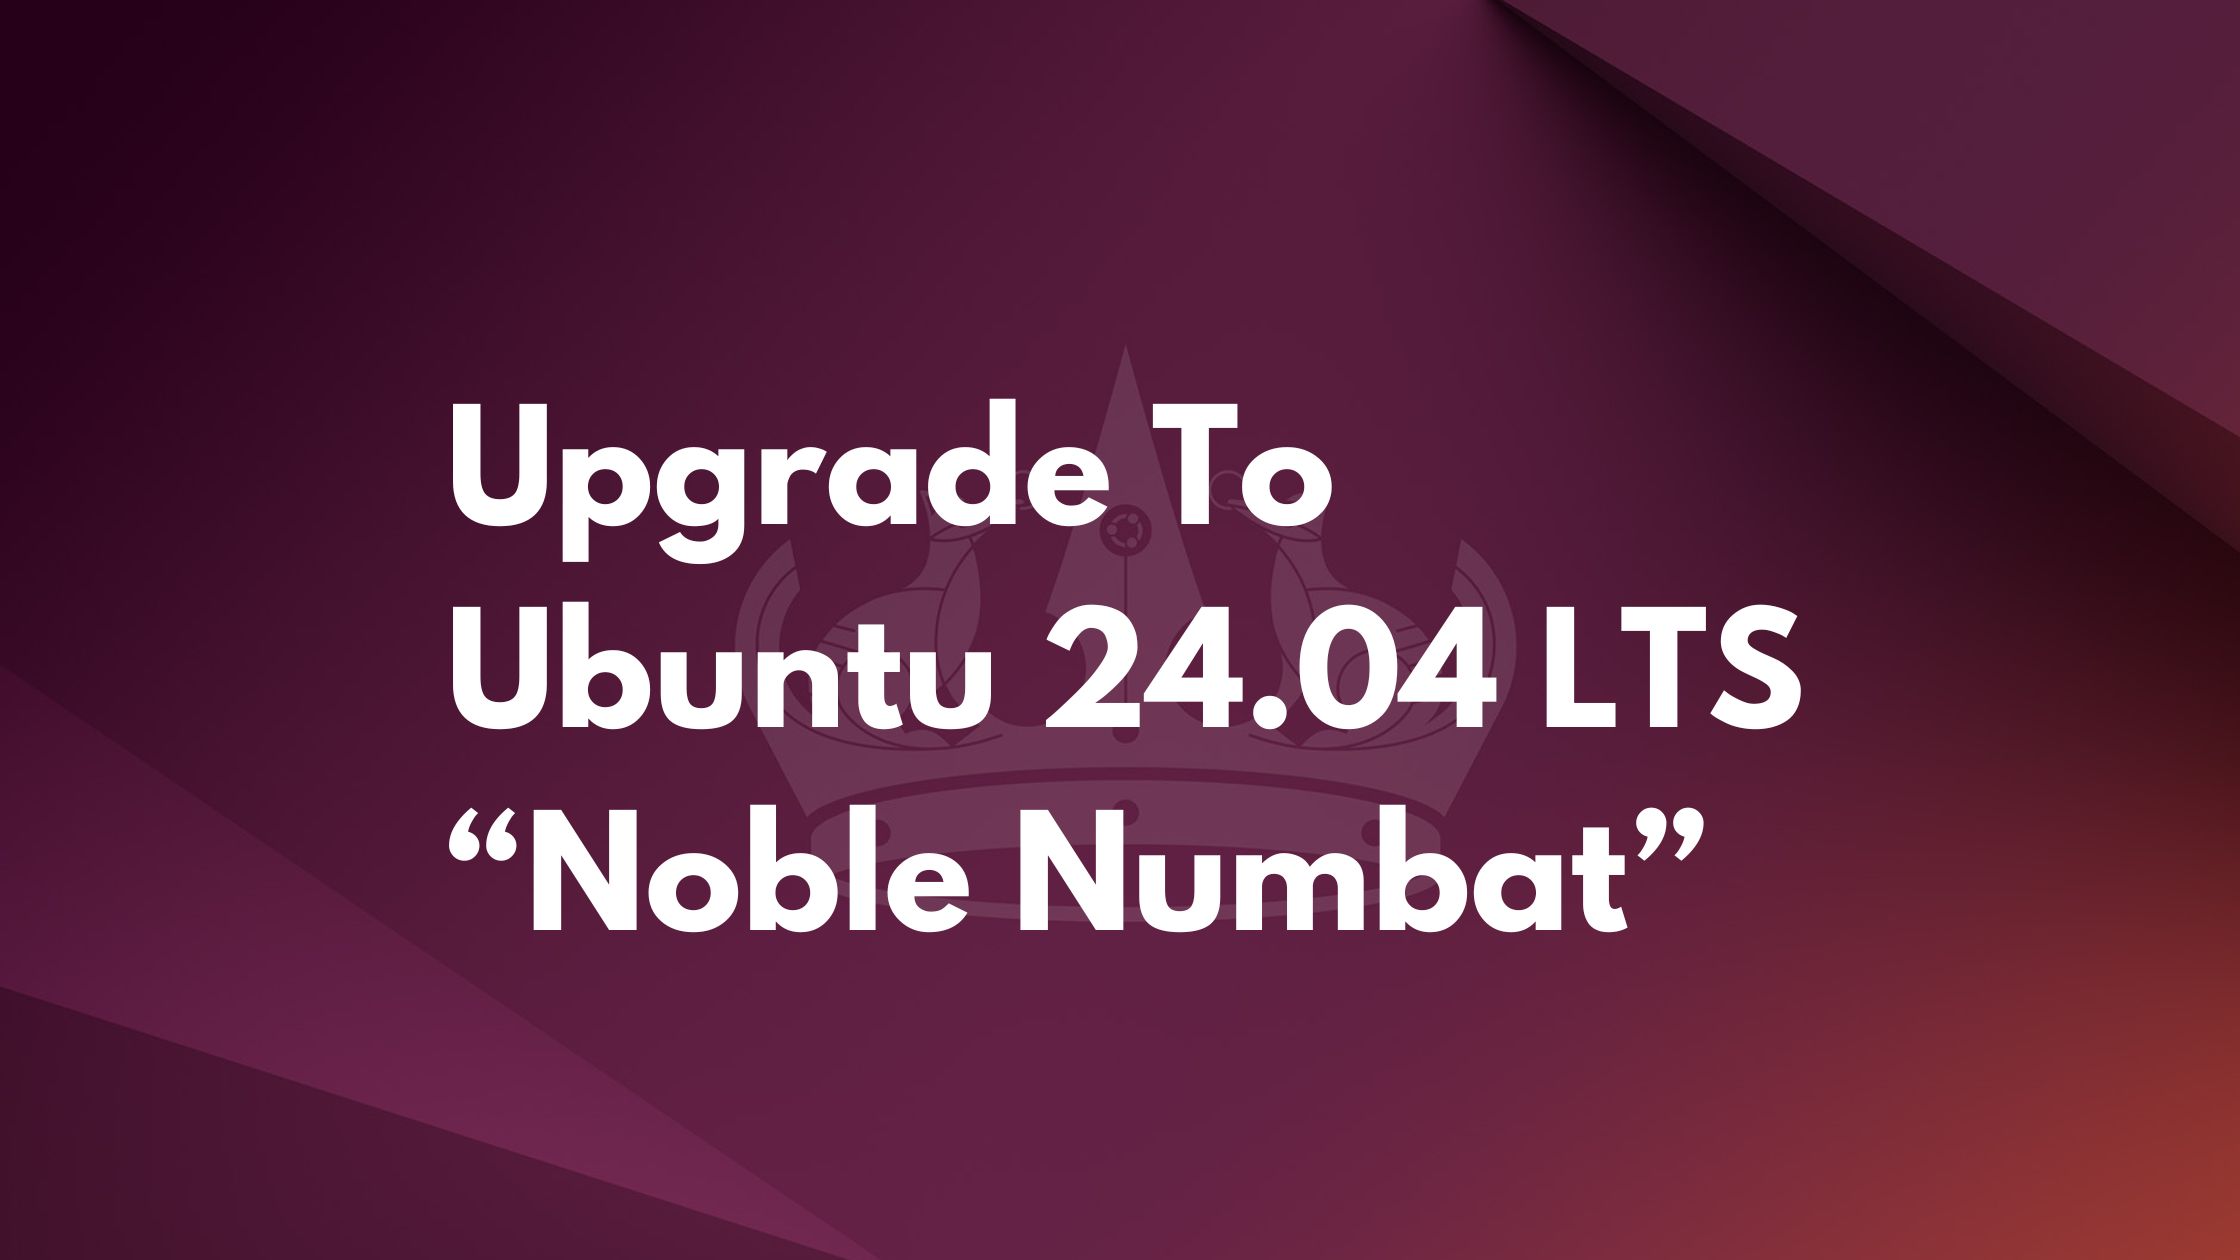 How To Upgrade To Ubuntu 24.04 LTS From 22.04 LTS And 23.10